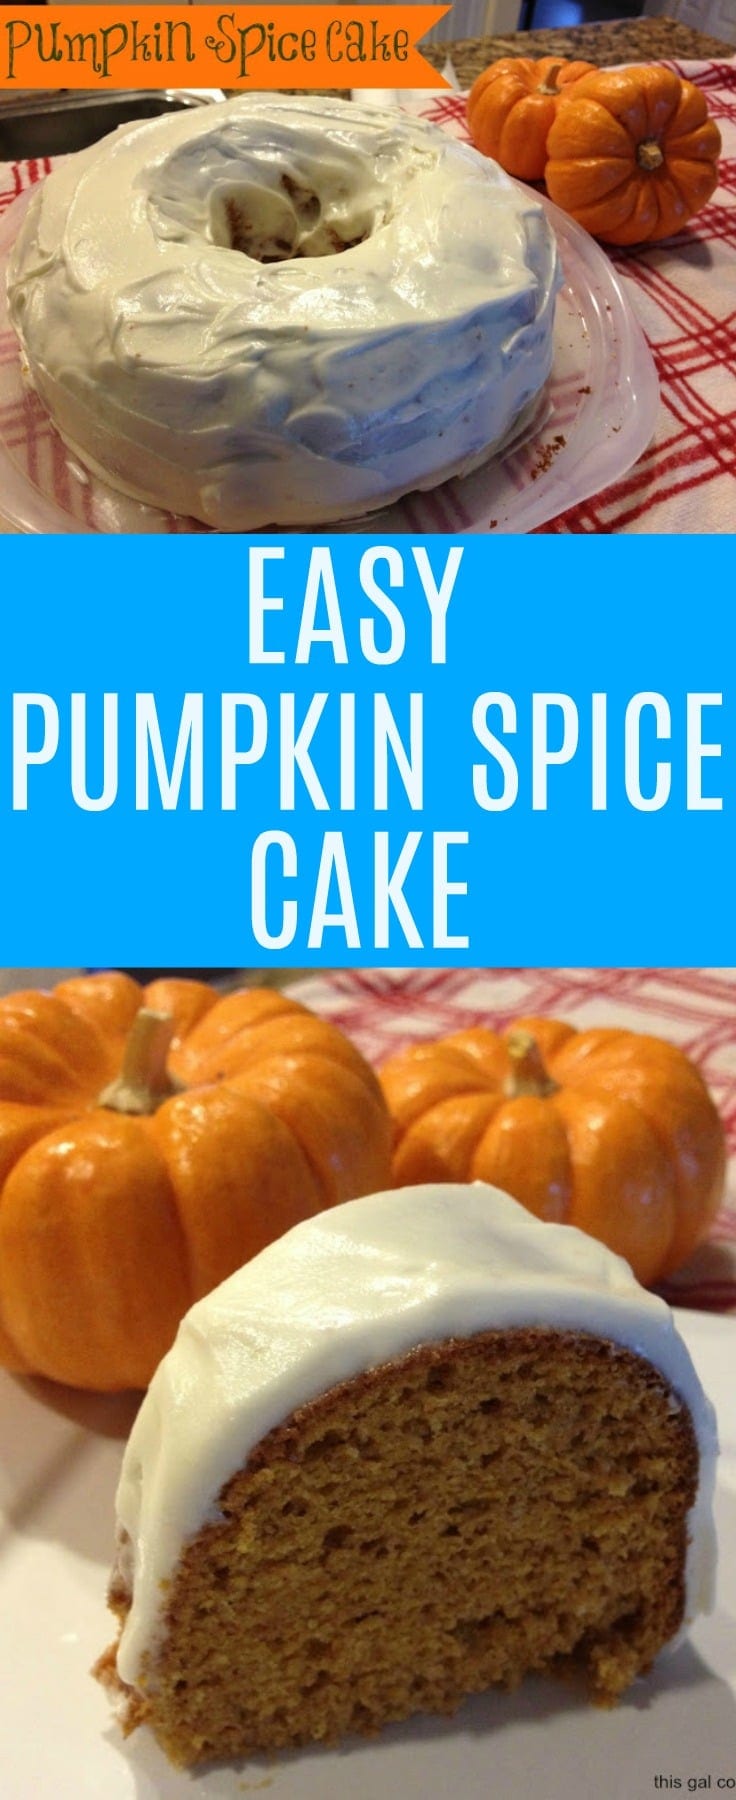 This easy pumpkin spice cake is super moist and full of bold fall flavors! You'll love this fall favorite cake and the cream cheese frosting, too!